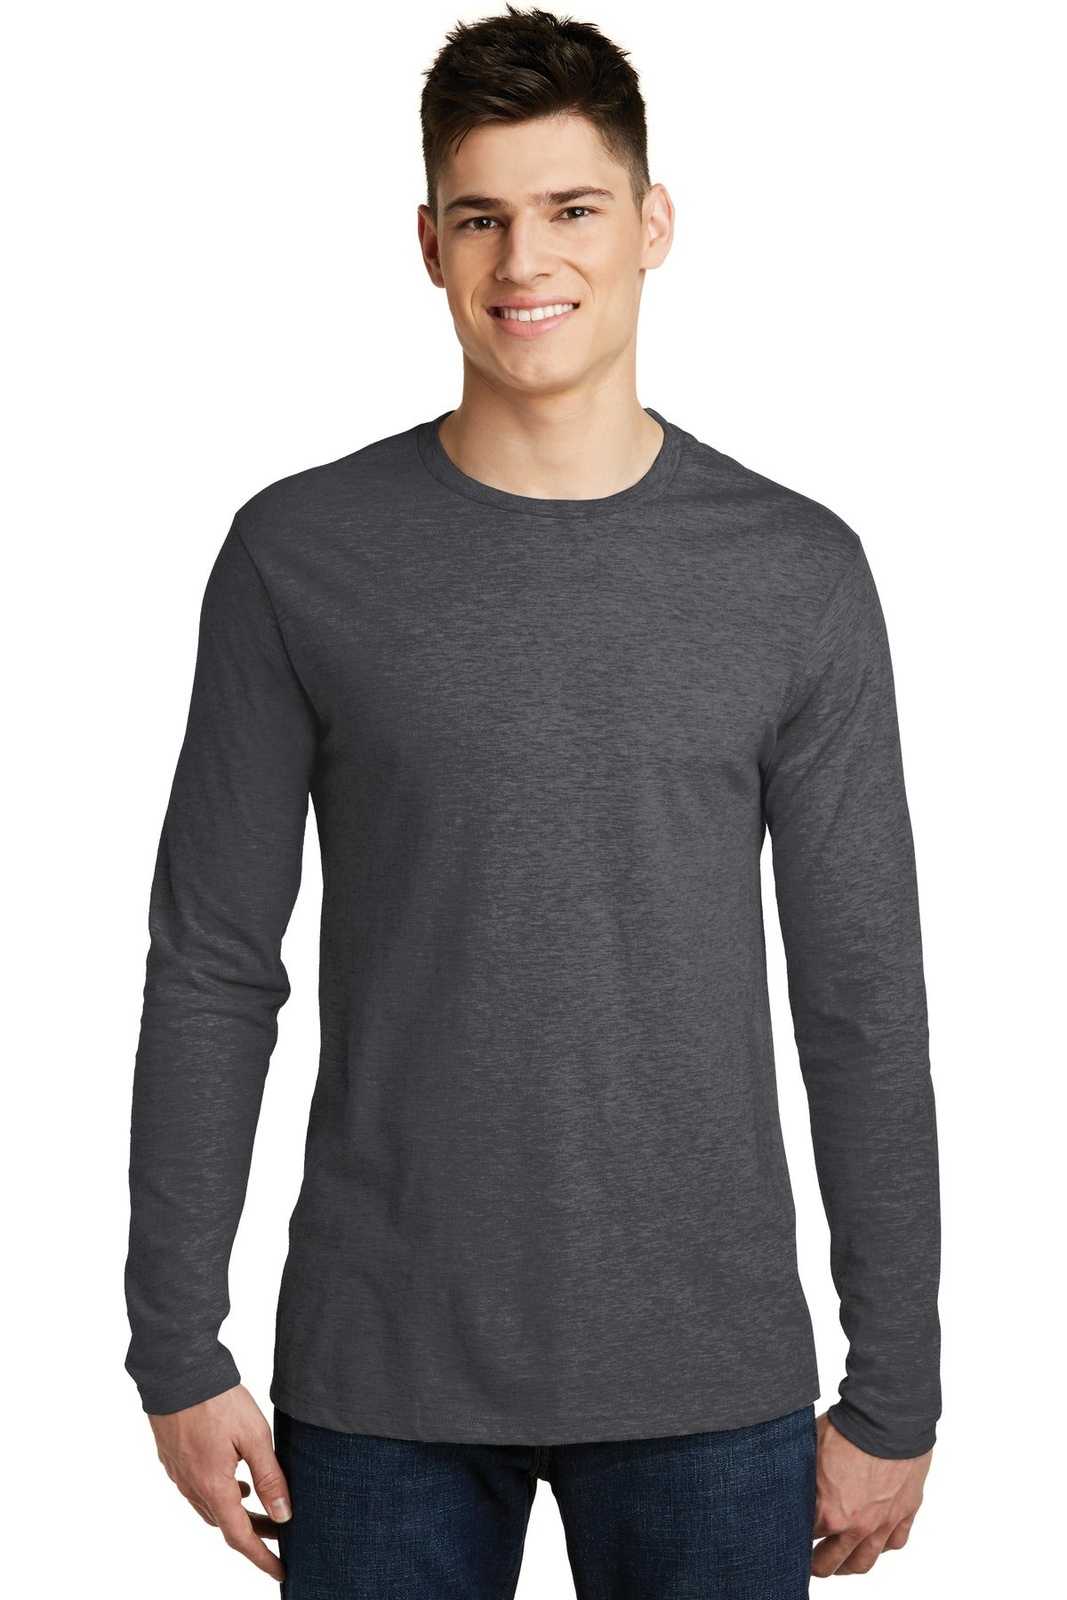 District DT6200 Very Important Tee Long Sleeve - Heathered Charcoal - HIT a Double - 1